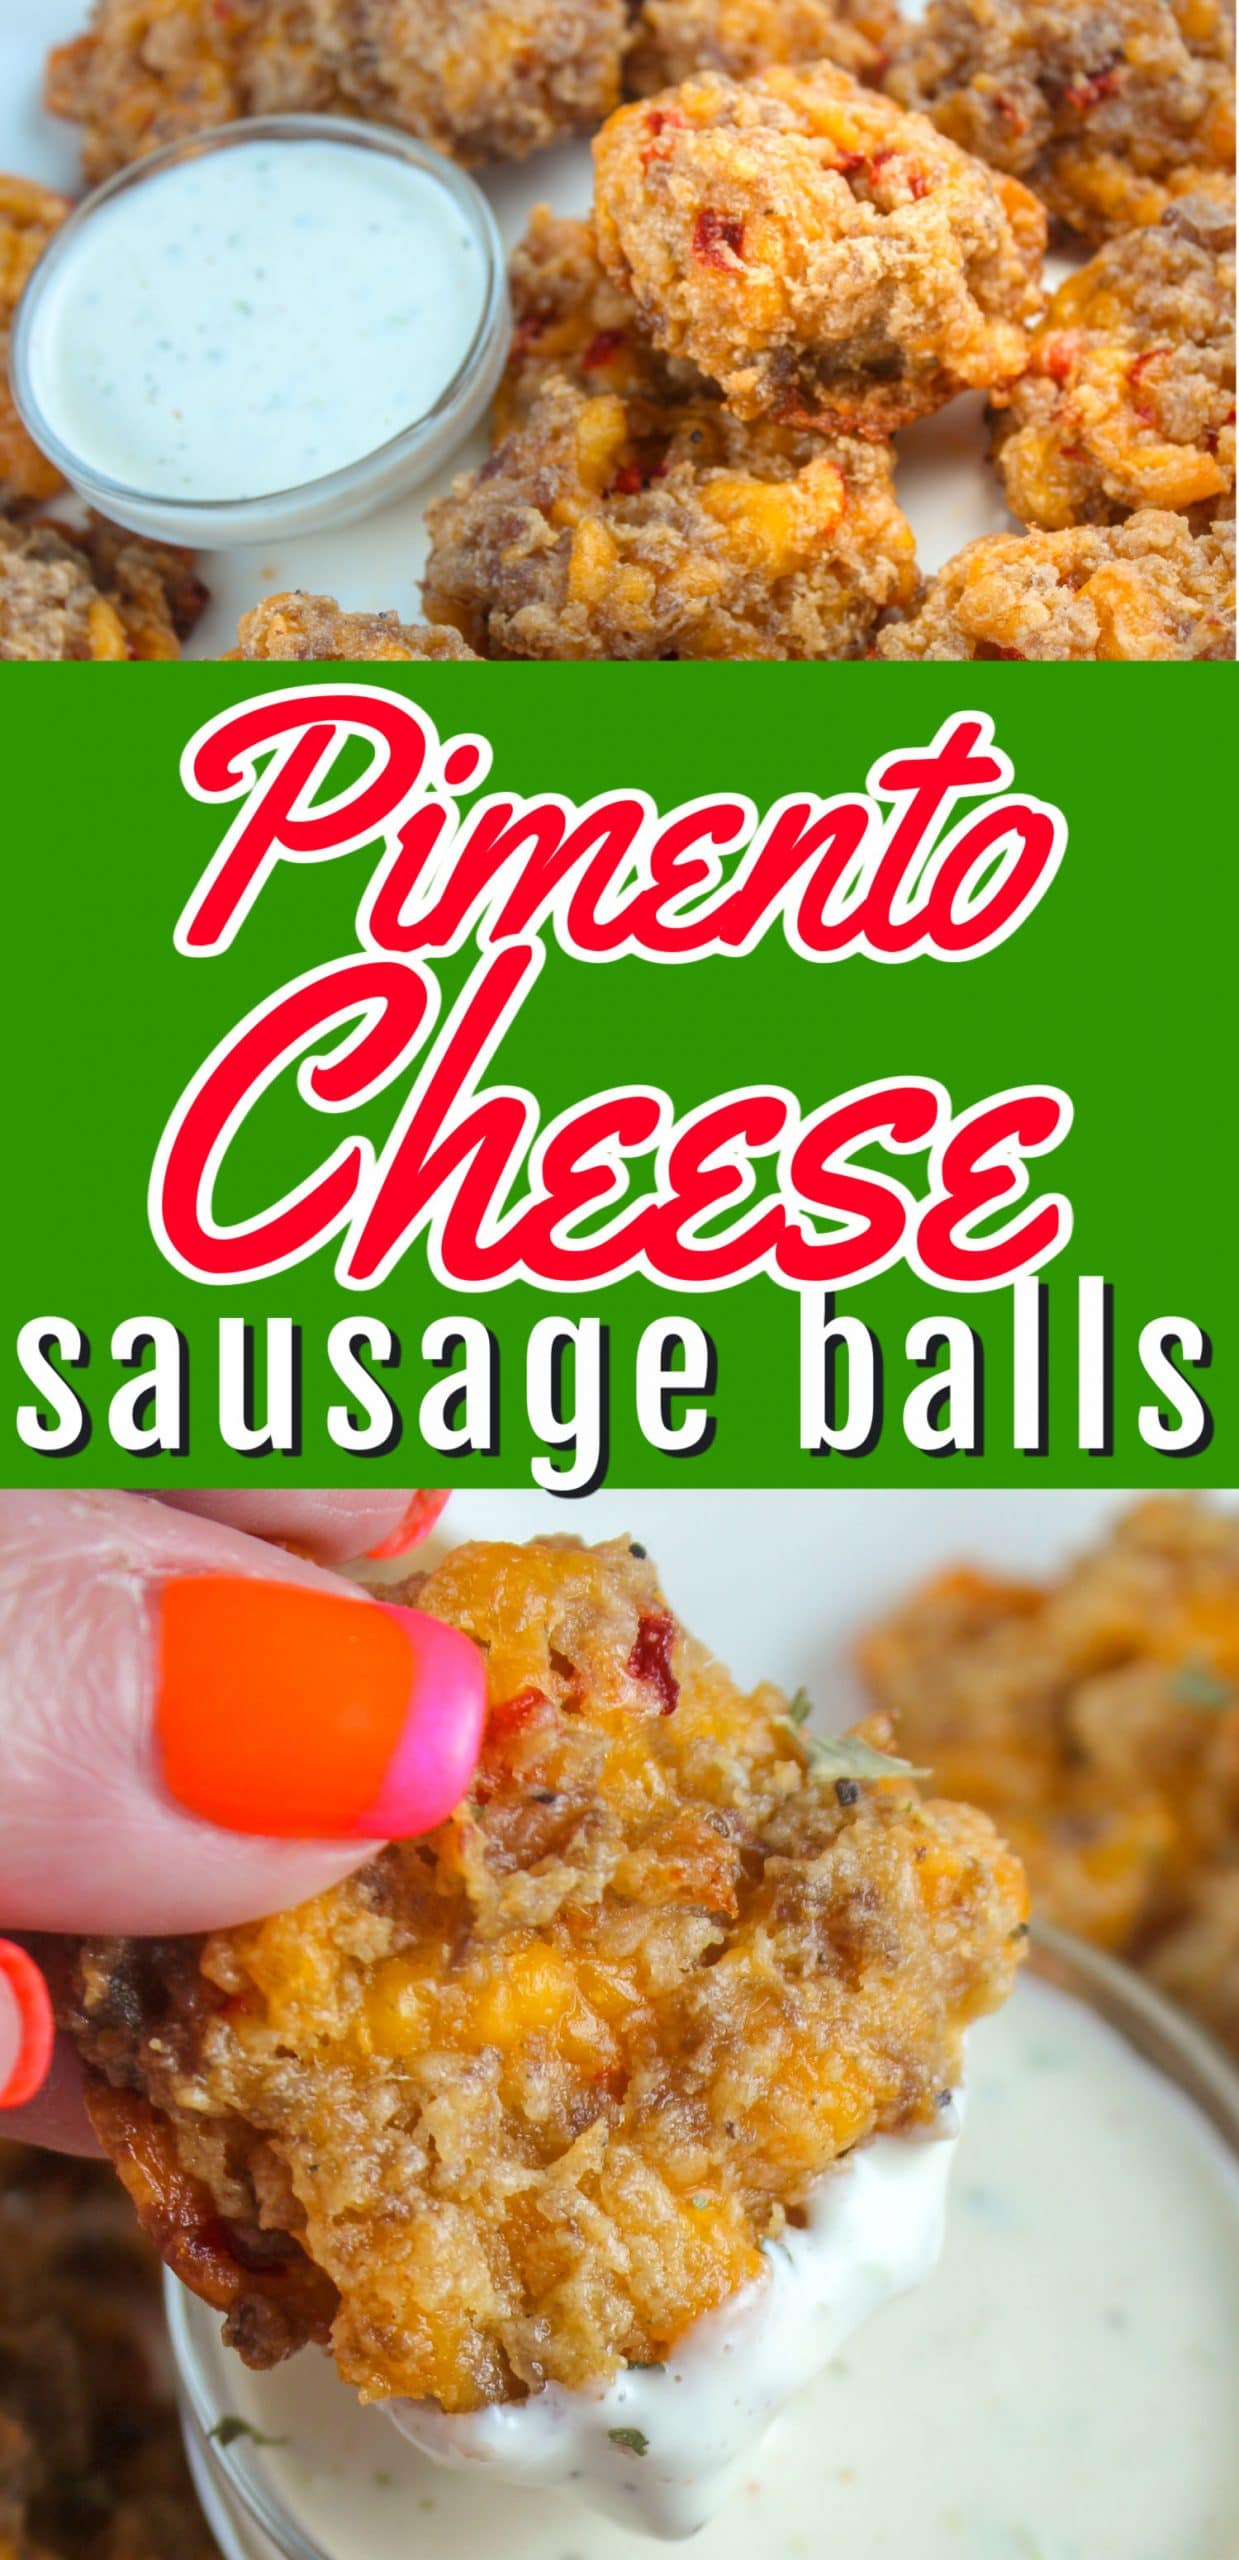 Pimento Cheese Sausage Balls are so tasty and I think the best version of sausage balls. If you haven't had them before - now's the time to make them! They're quick and a fun party food - but they also reheat really well.  via @foodhussy